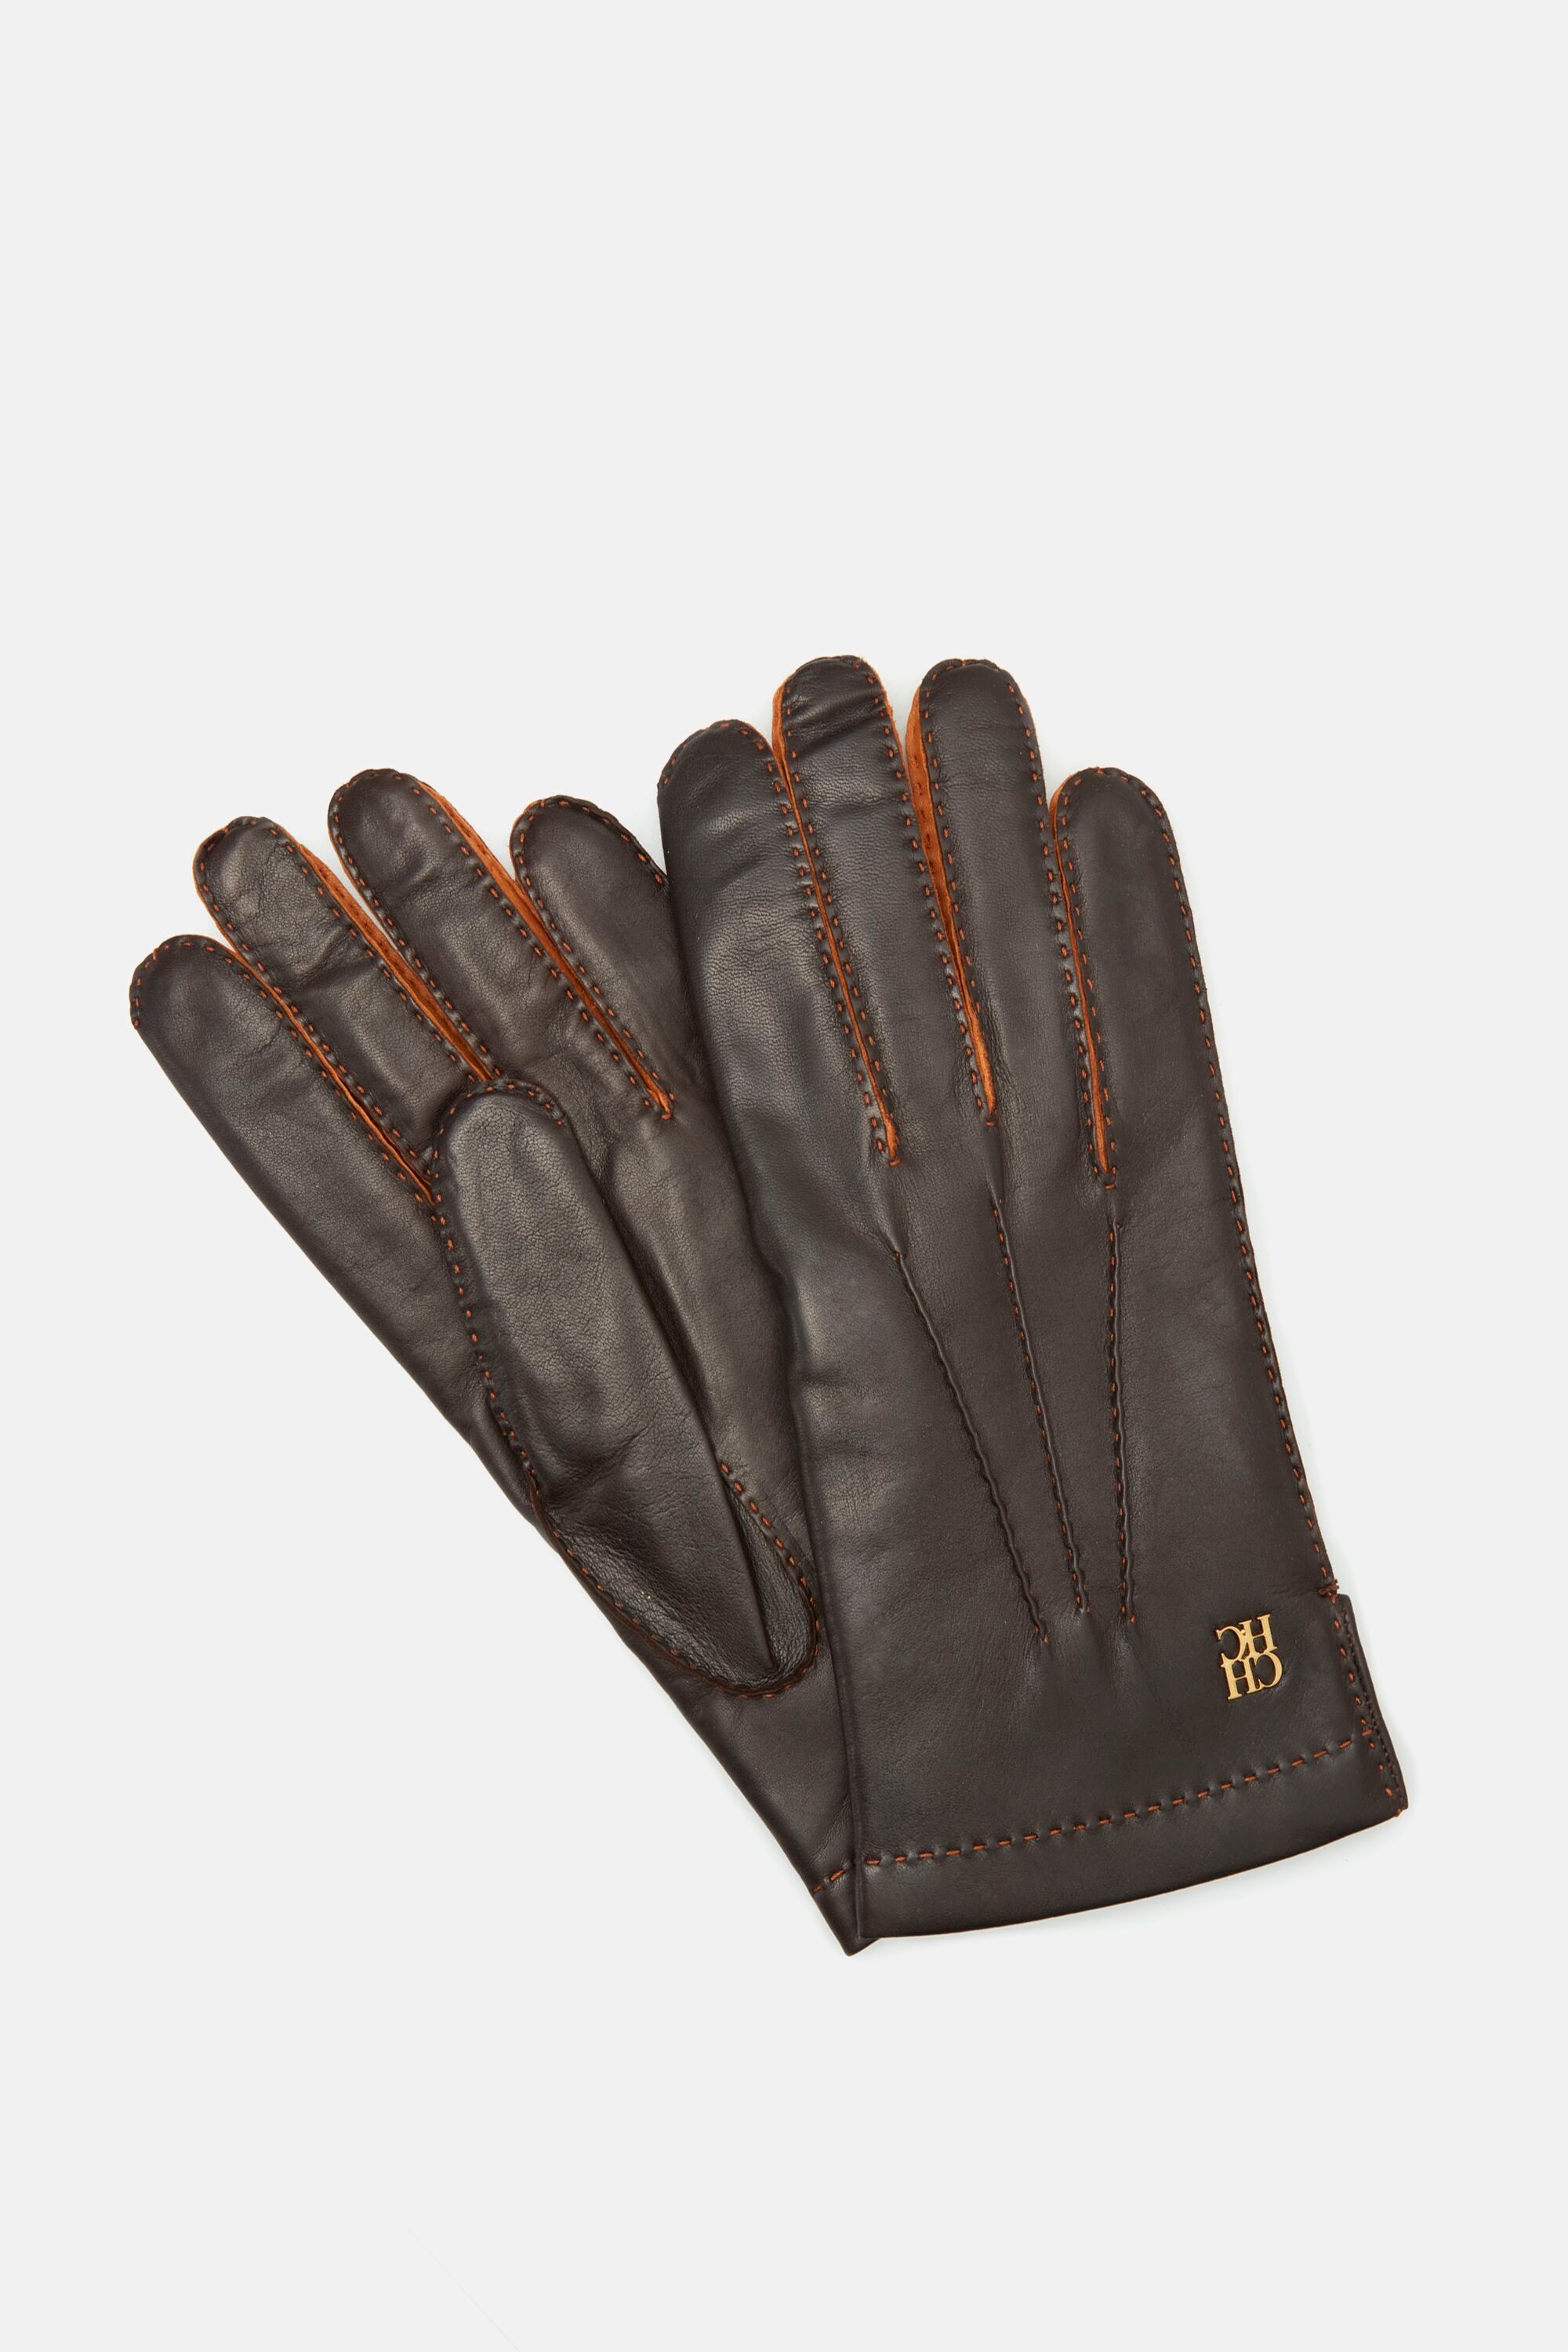 CHHC leather gloves